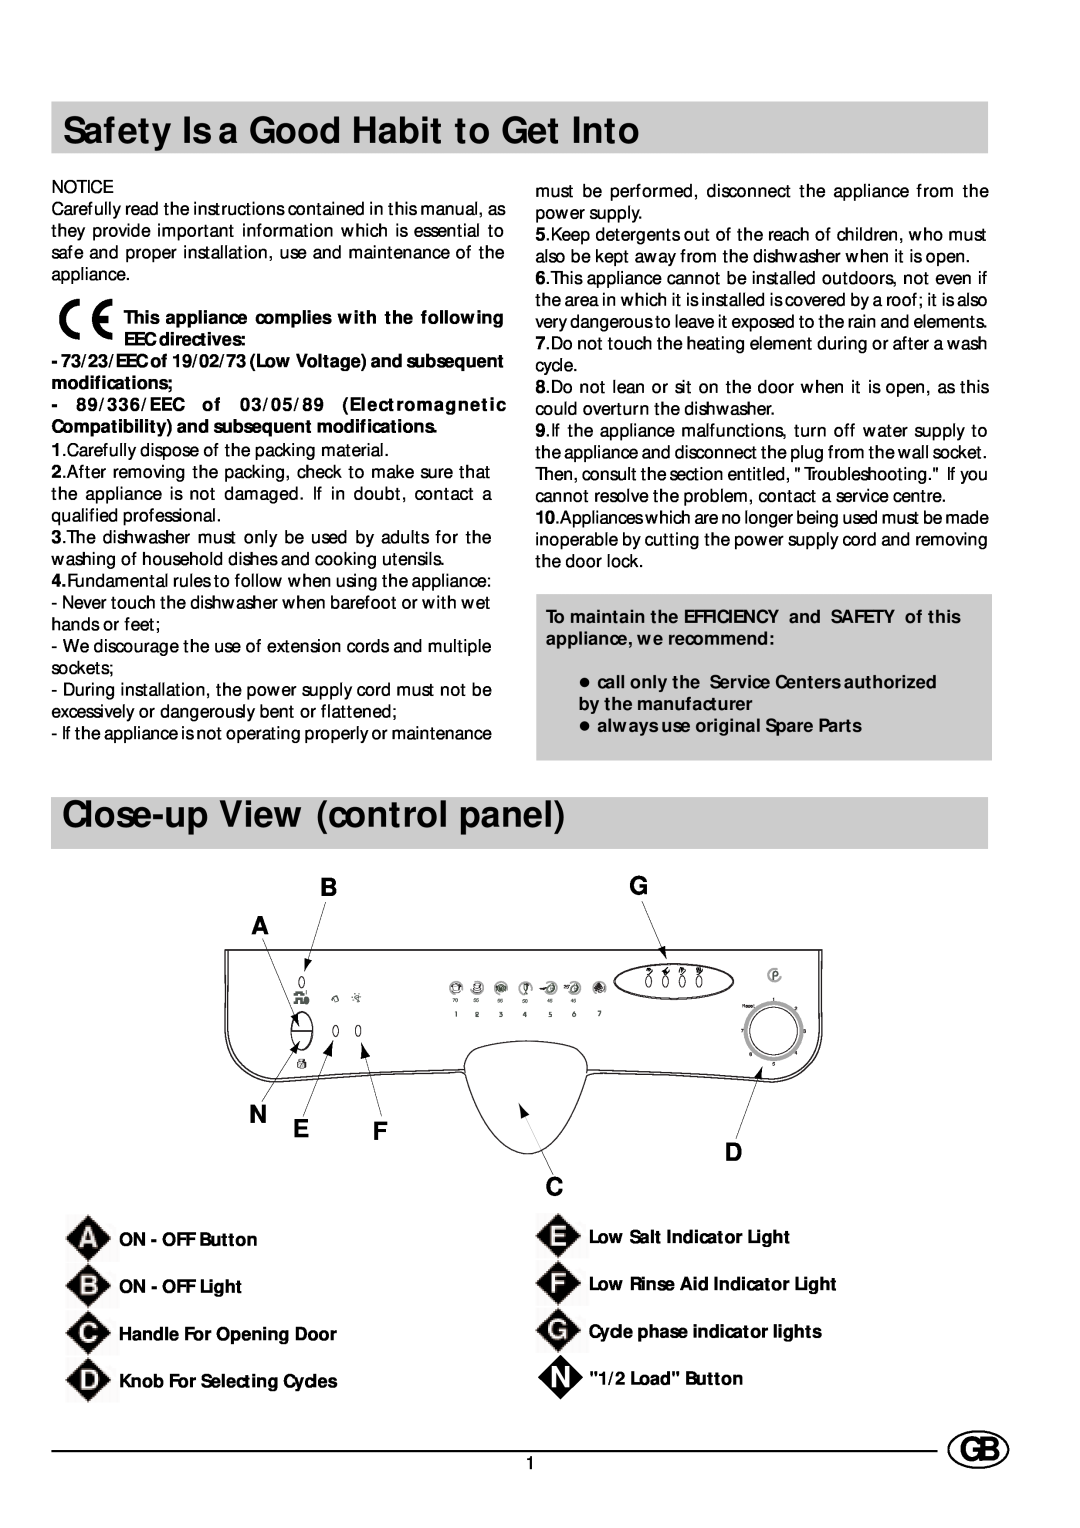 Indesit DI 67 manual Safety Is a Good Habit to Get Into, Close-up View control panel, λ always use original Spare Parts 